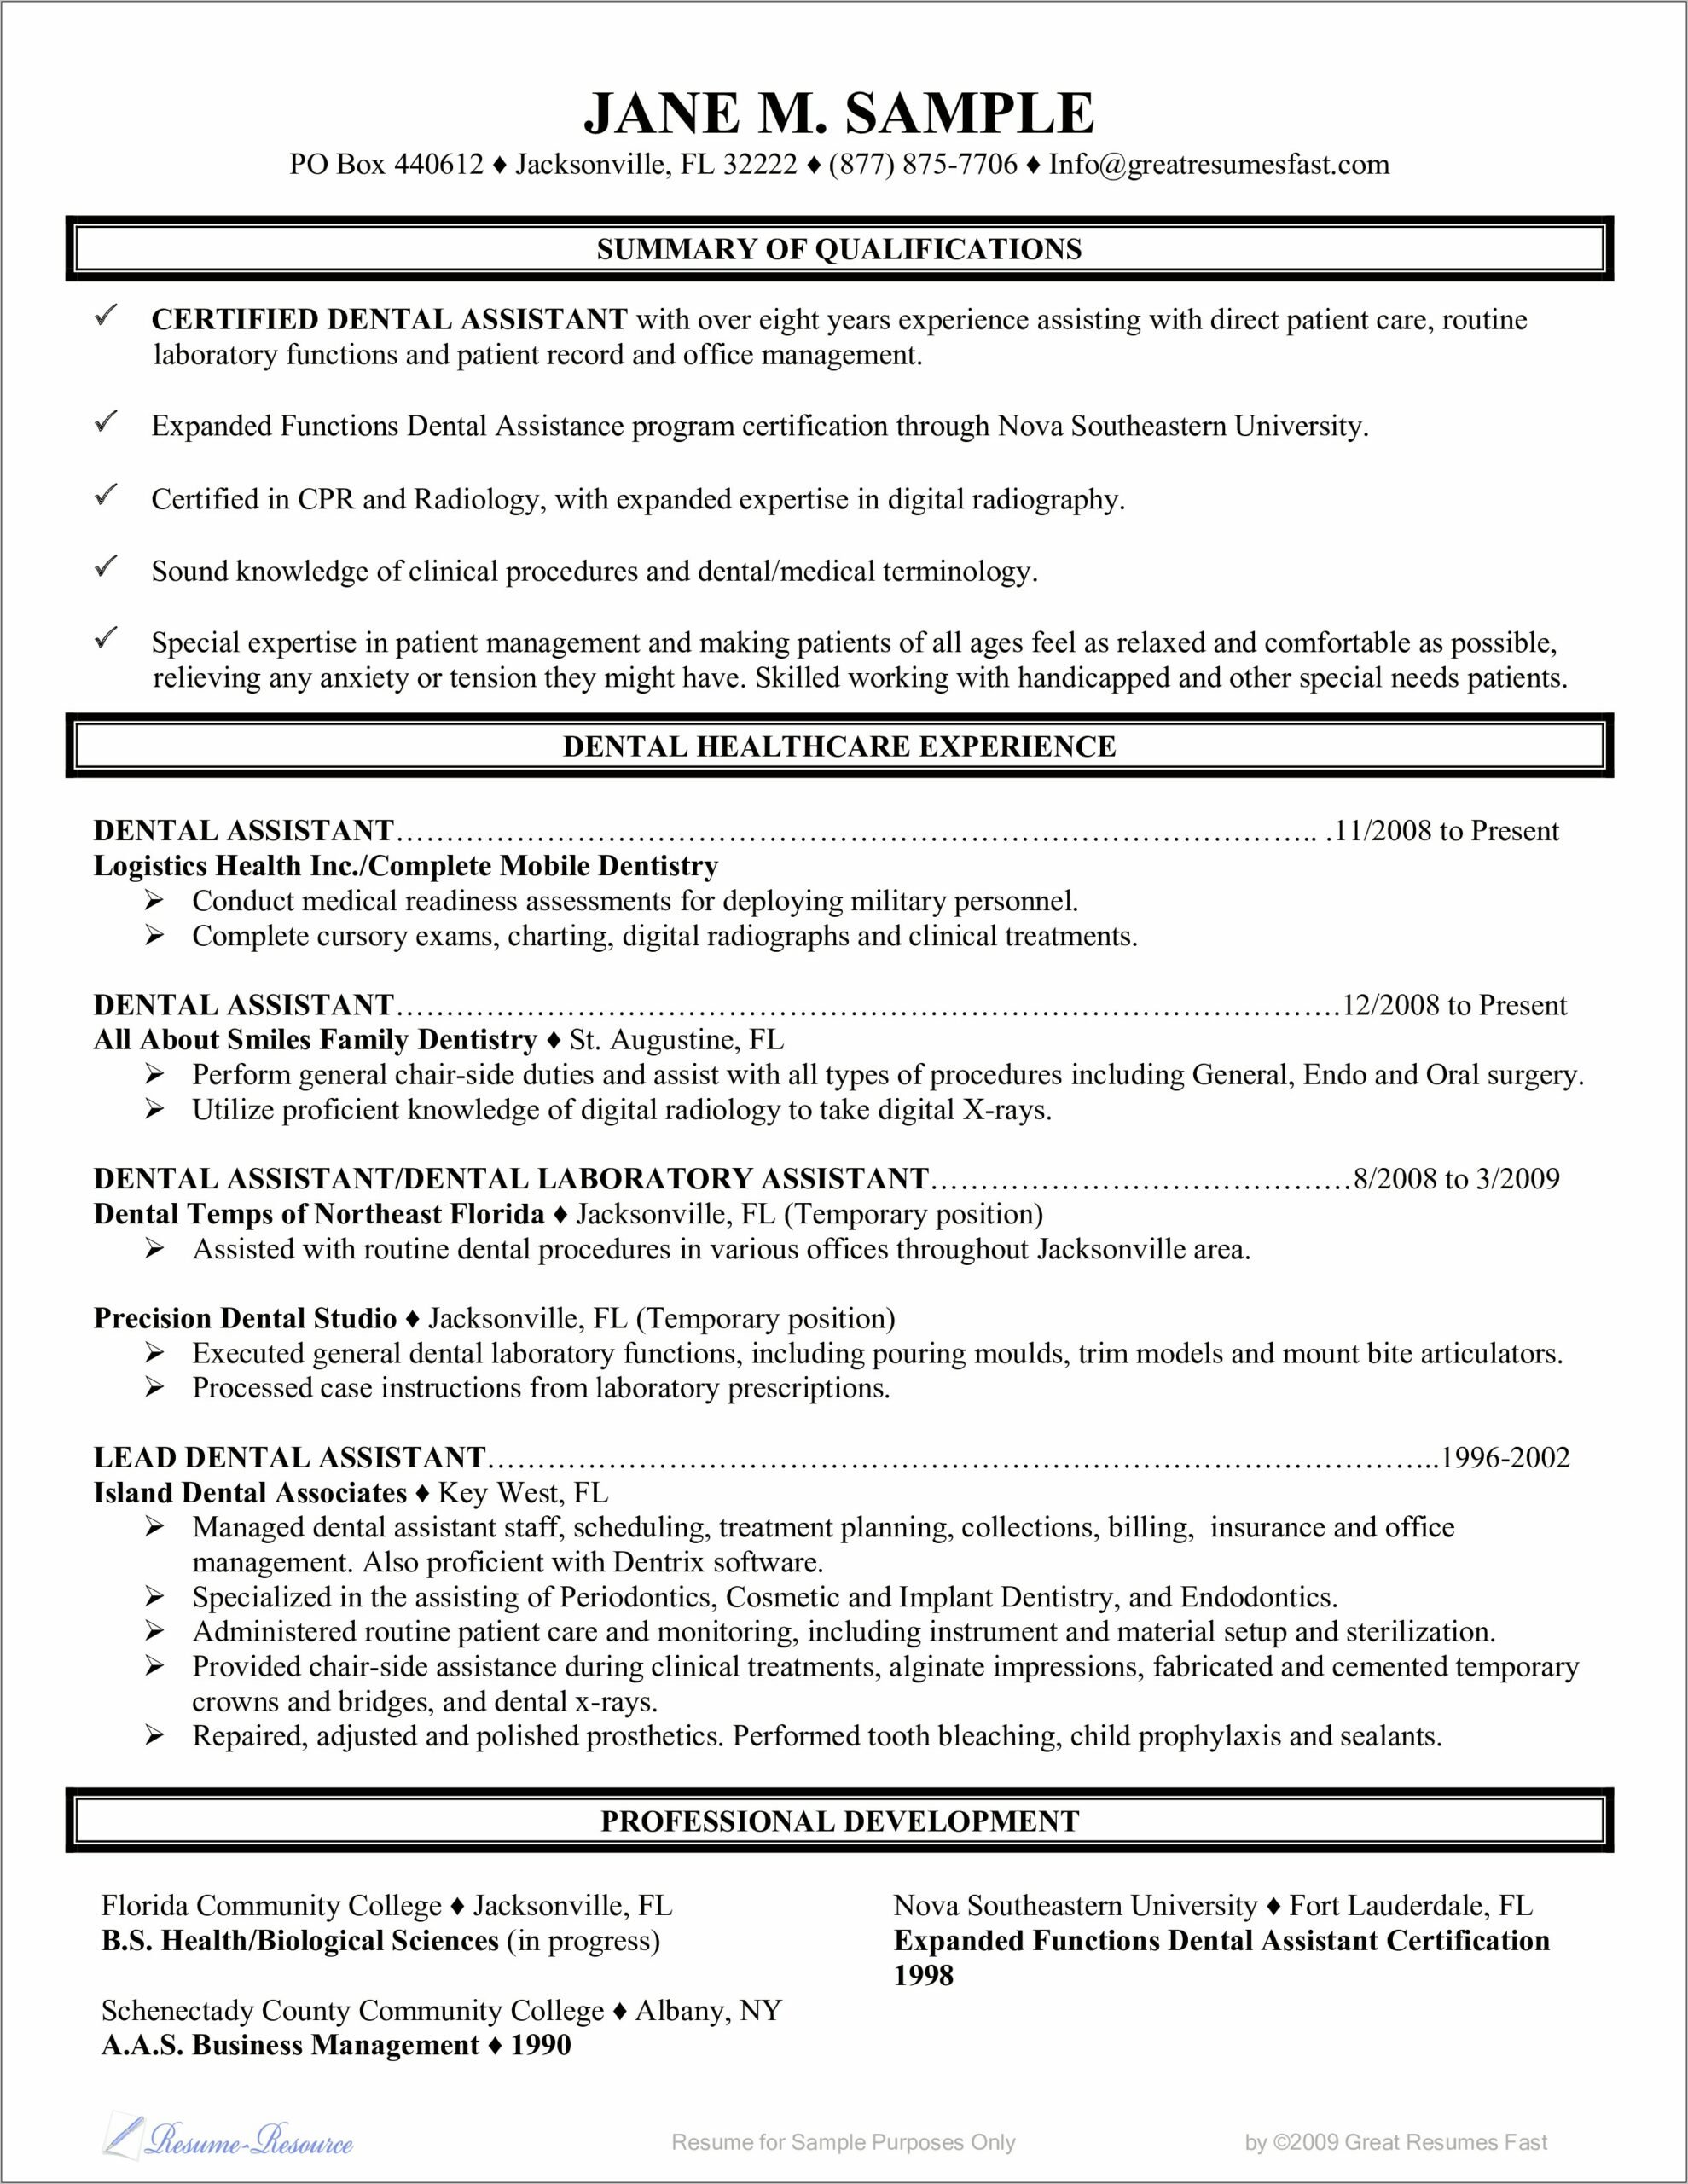 Dental Assistant Professional Summary For Resume